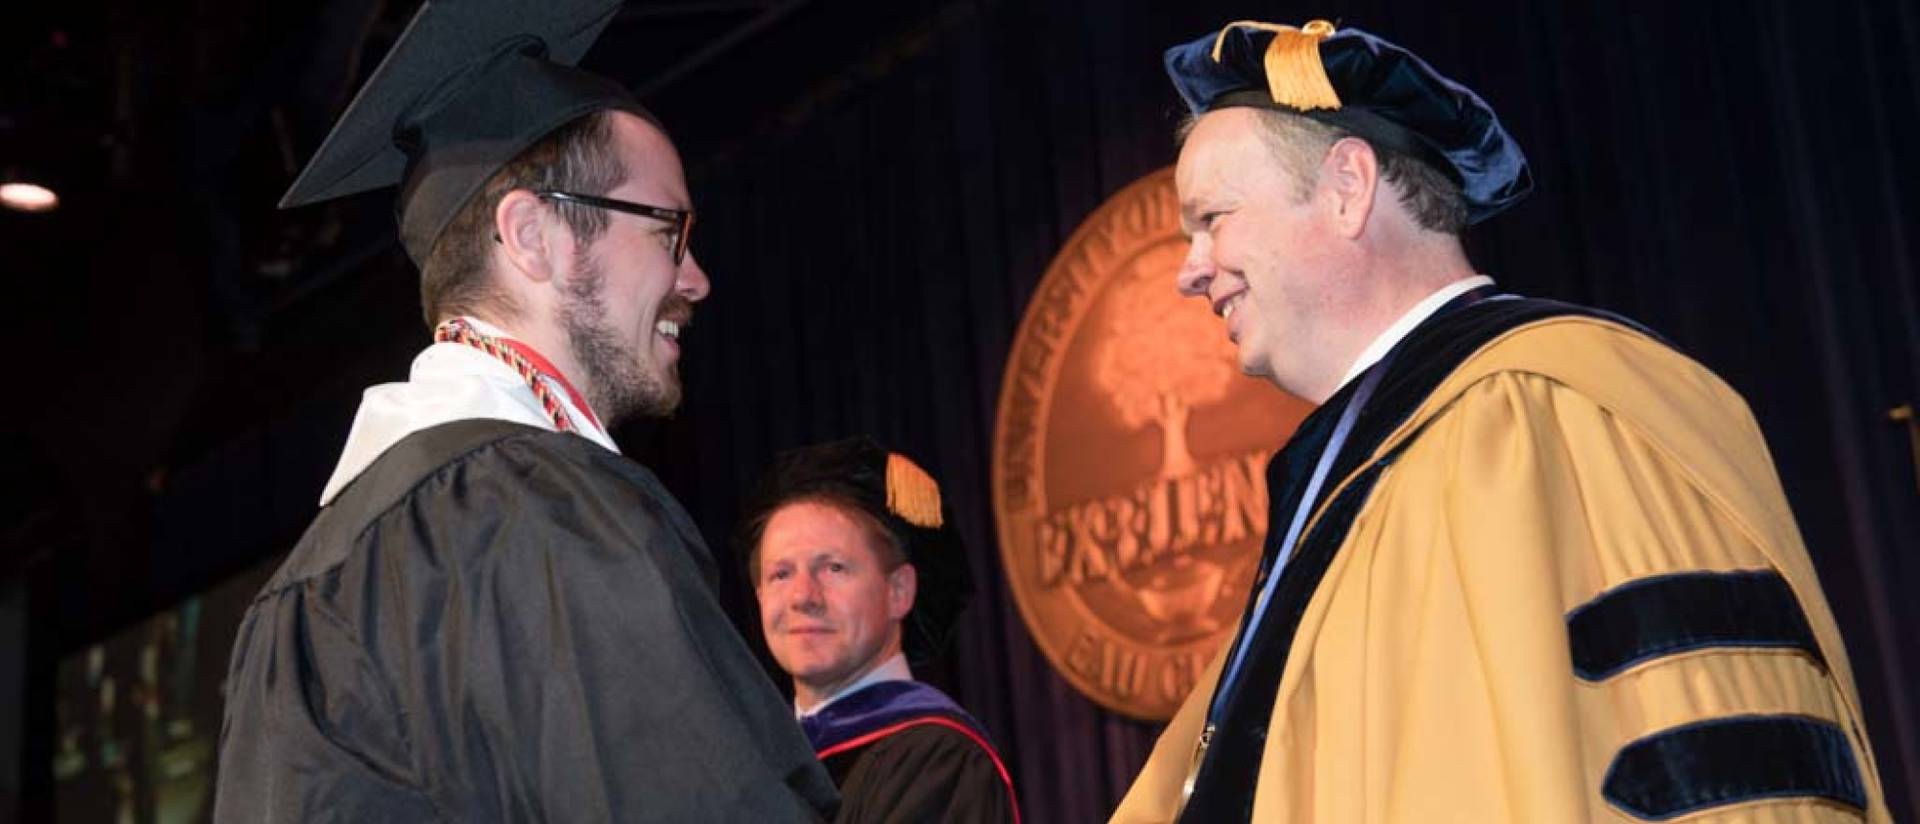 A Blugold shakes Chancellor James C. Schmidt's hand on stage during commencement.